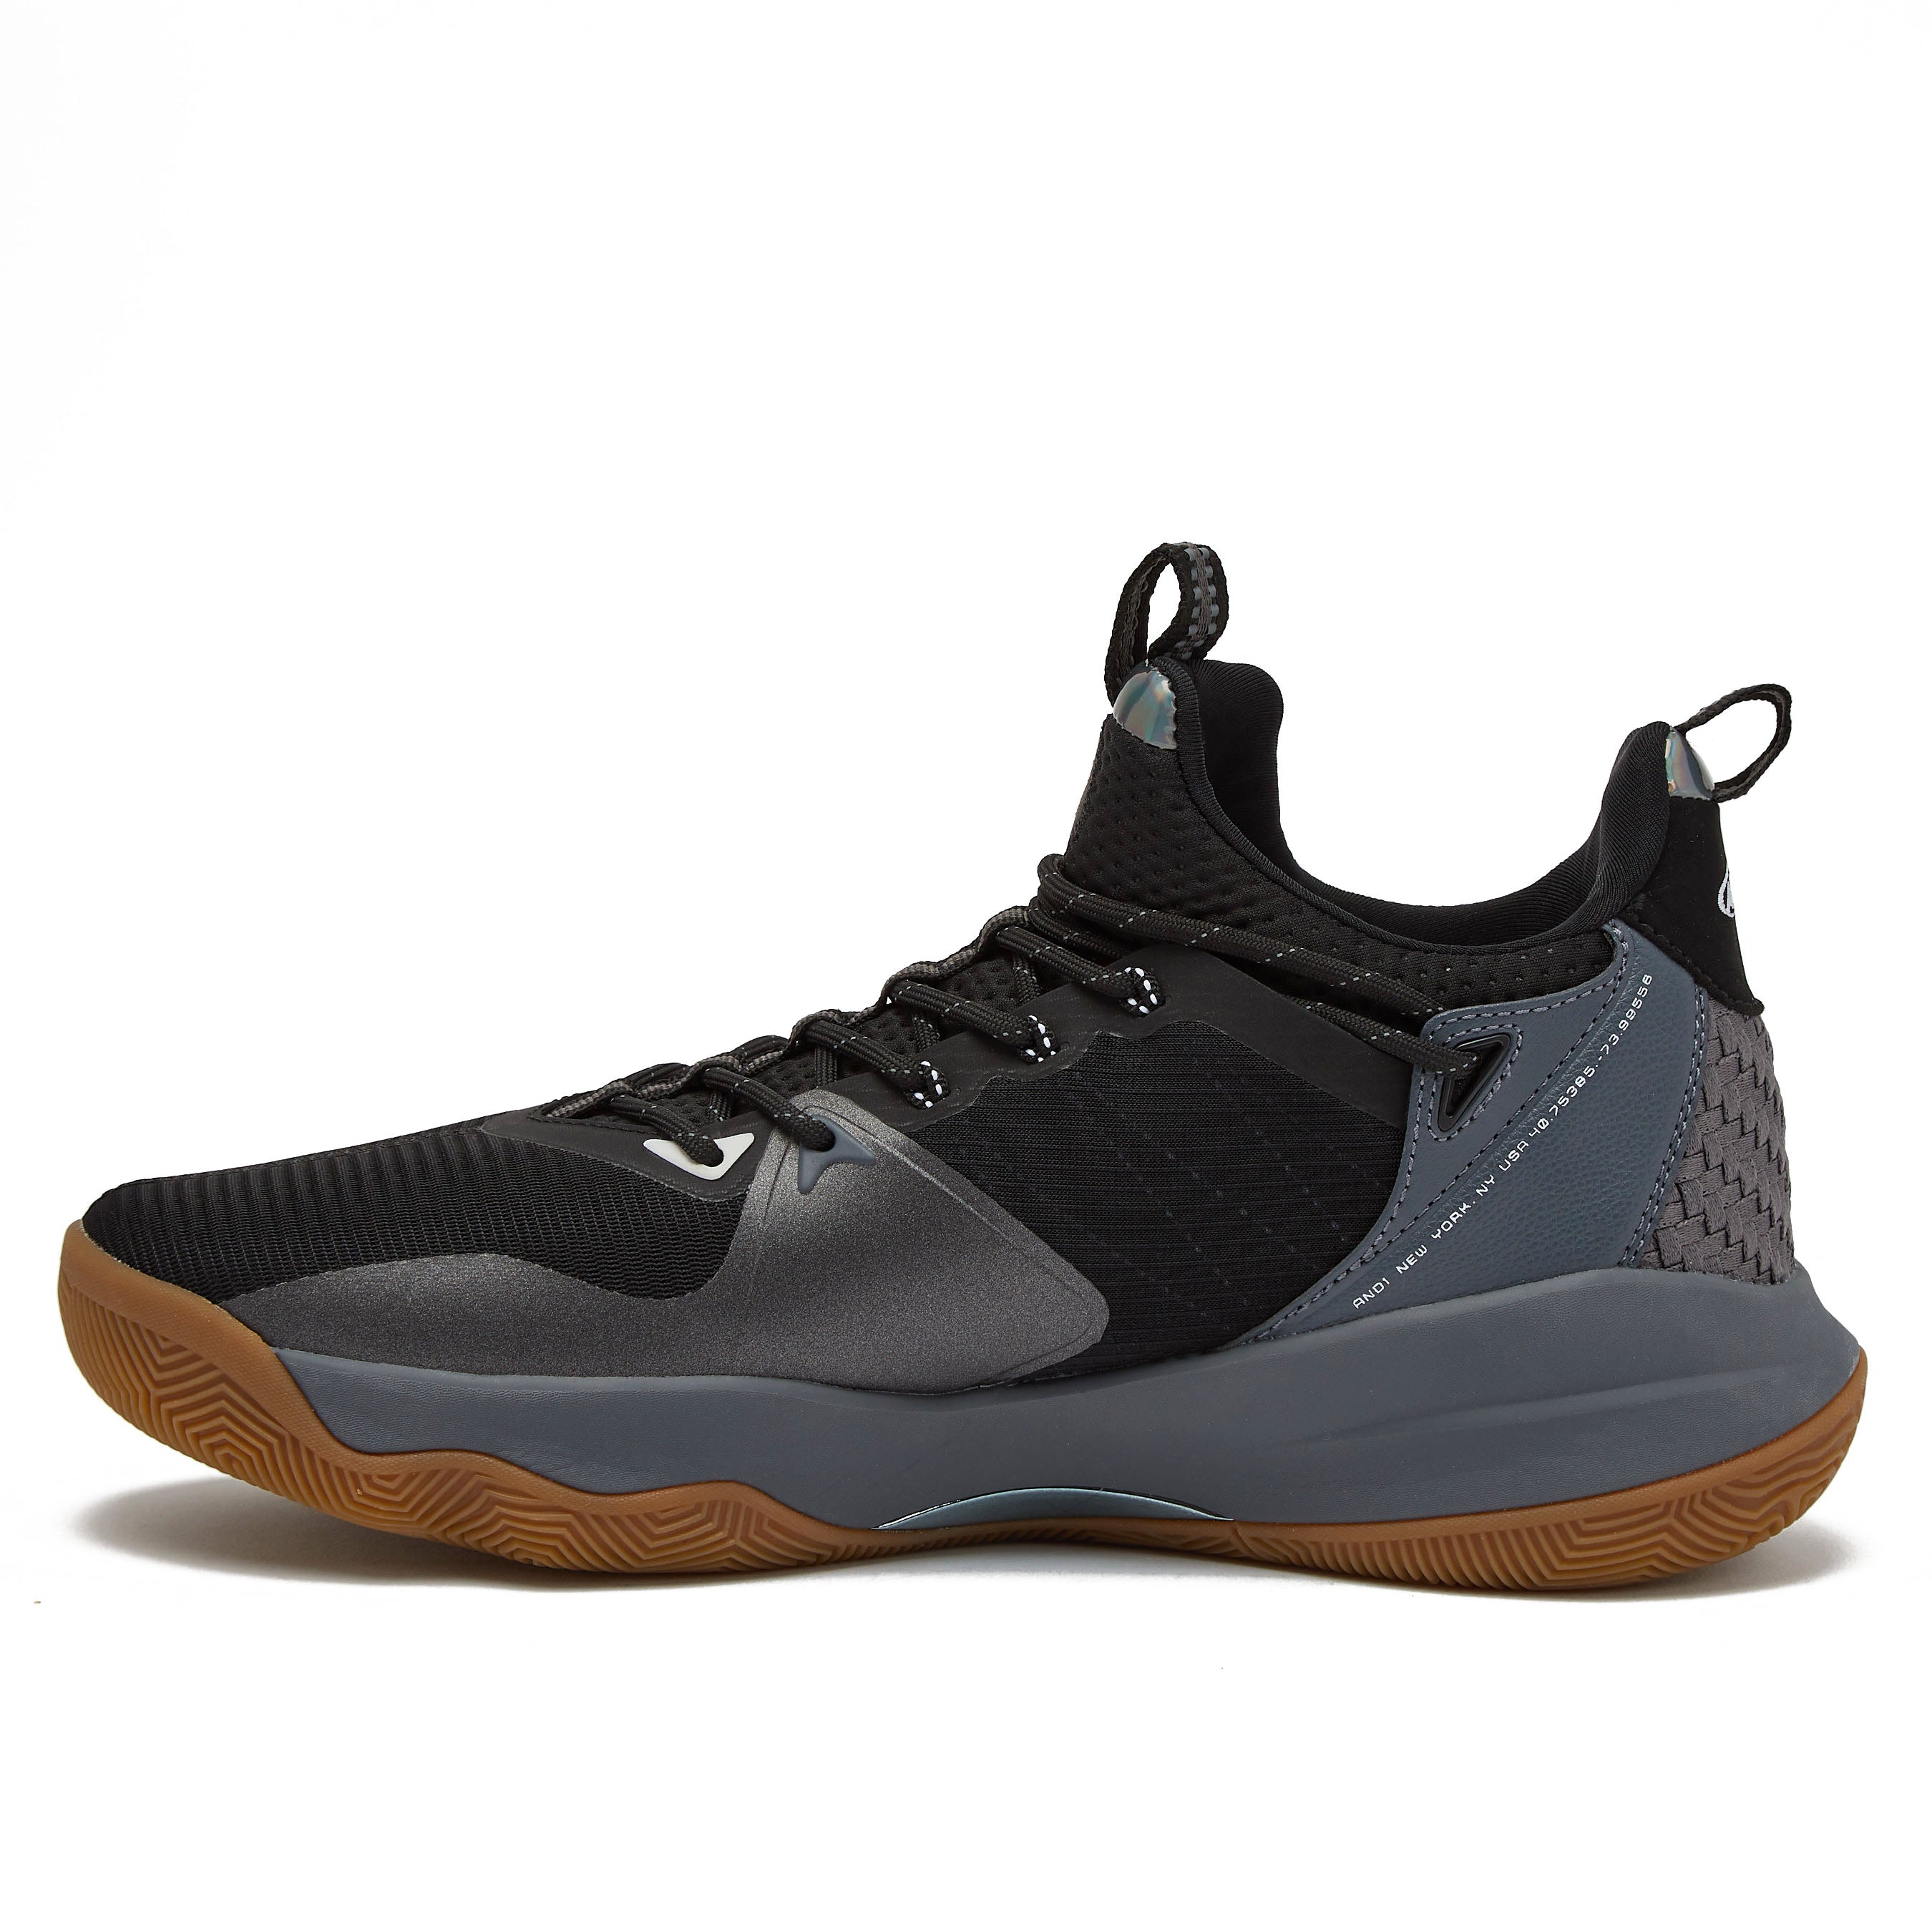 AND1 Attack 3.0 | Basketball Shoes for Men | Mens Basketball Shoes ...